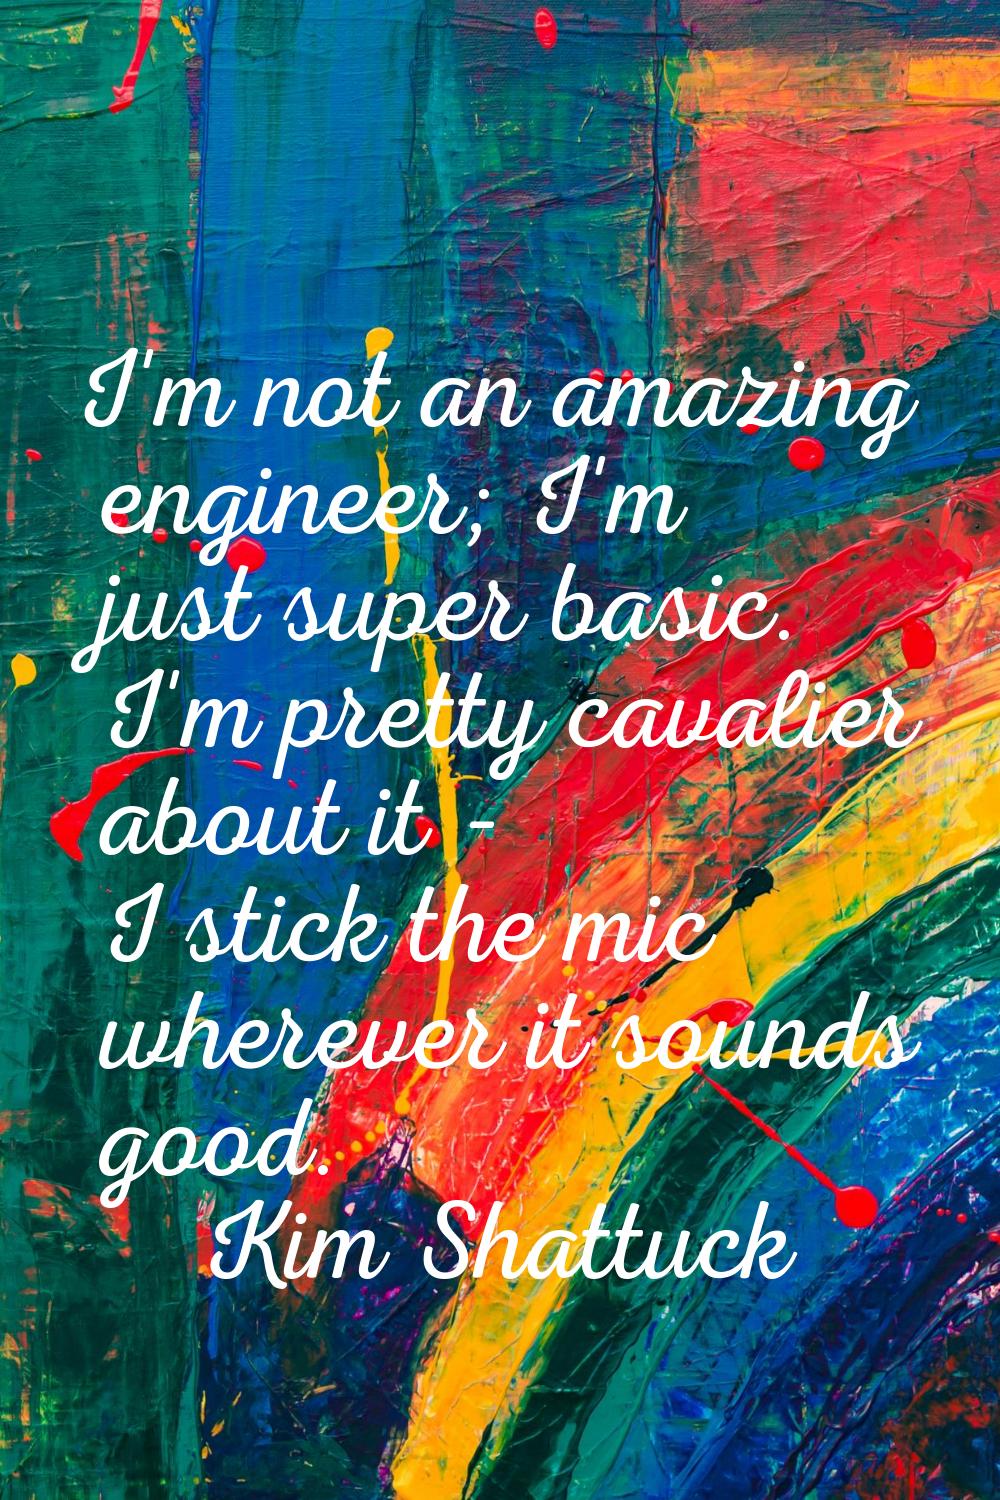 I'm not an amazing engineer; I'm just super basic. I'm pretty cavalier about it - I stick the mic w